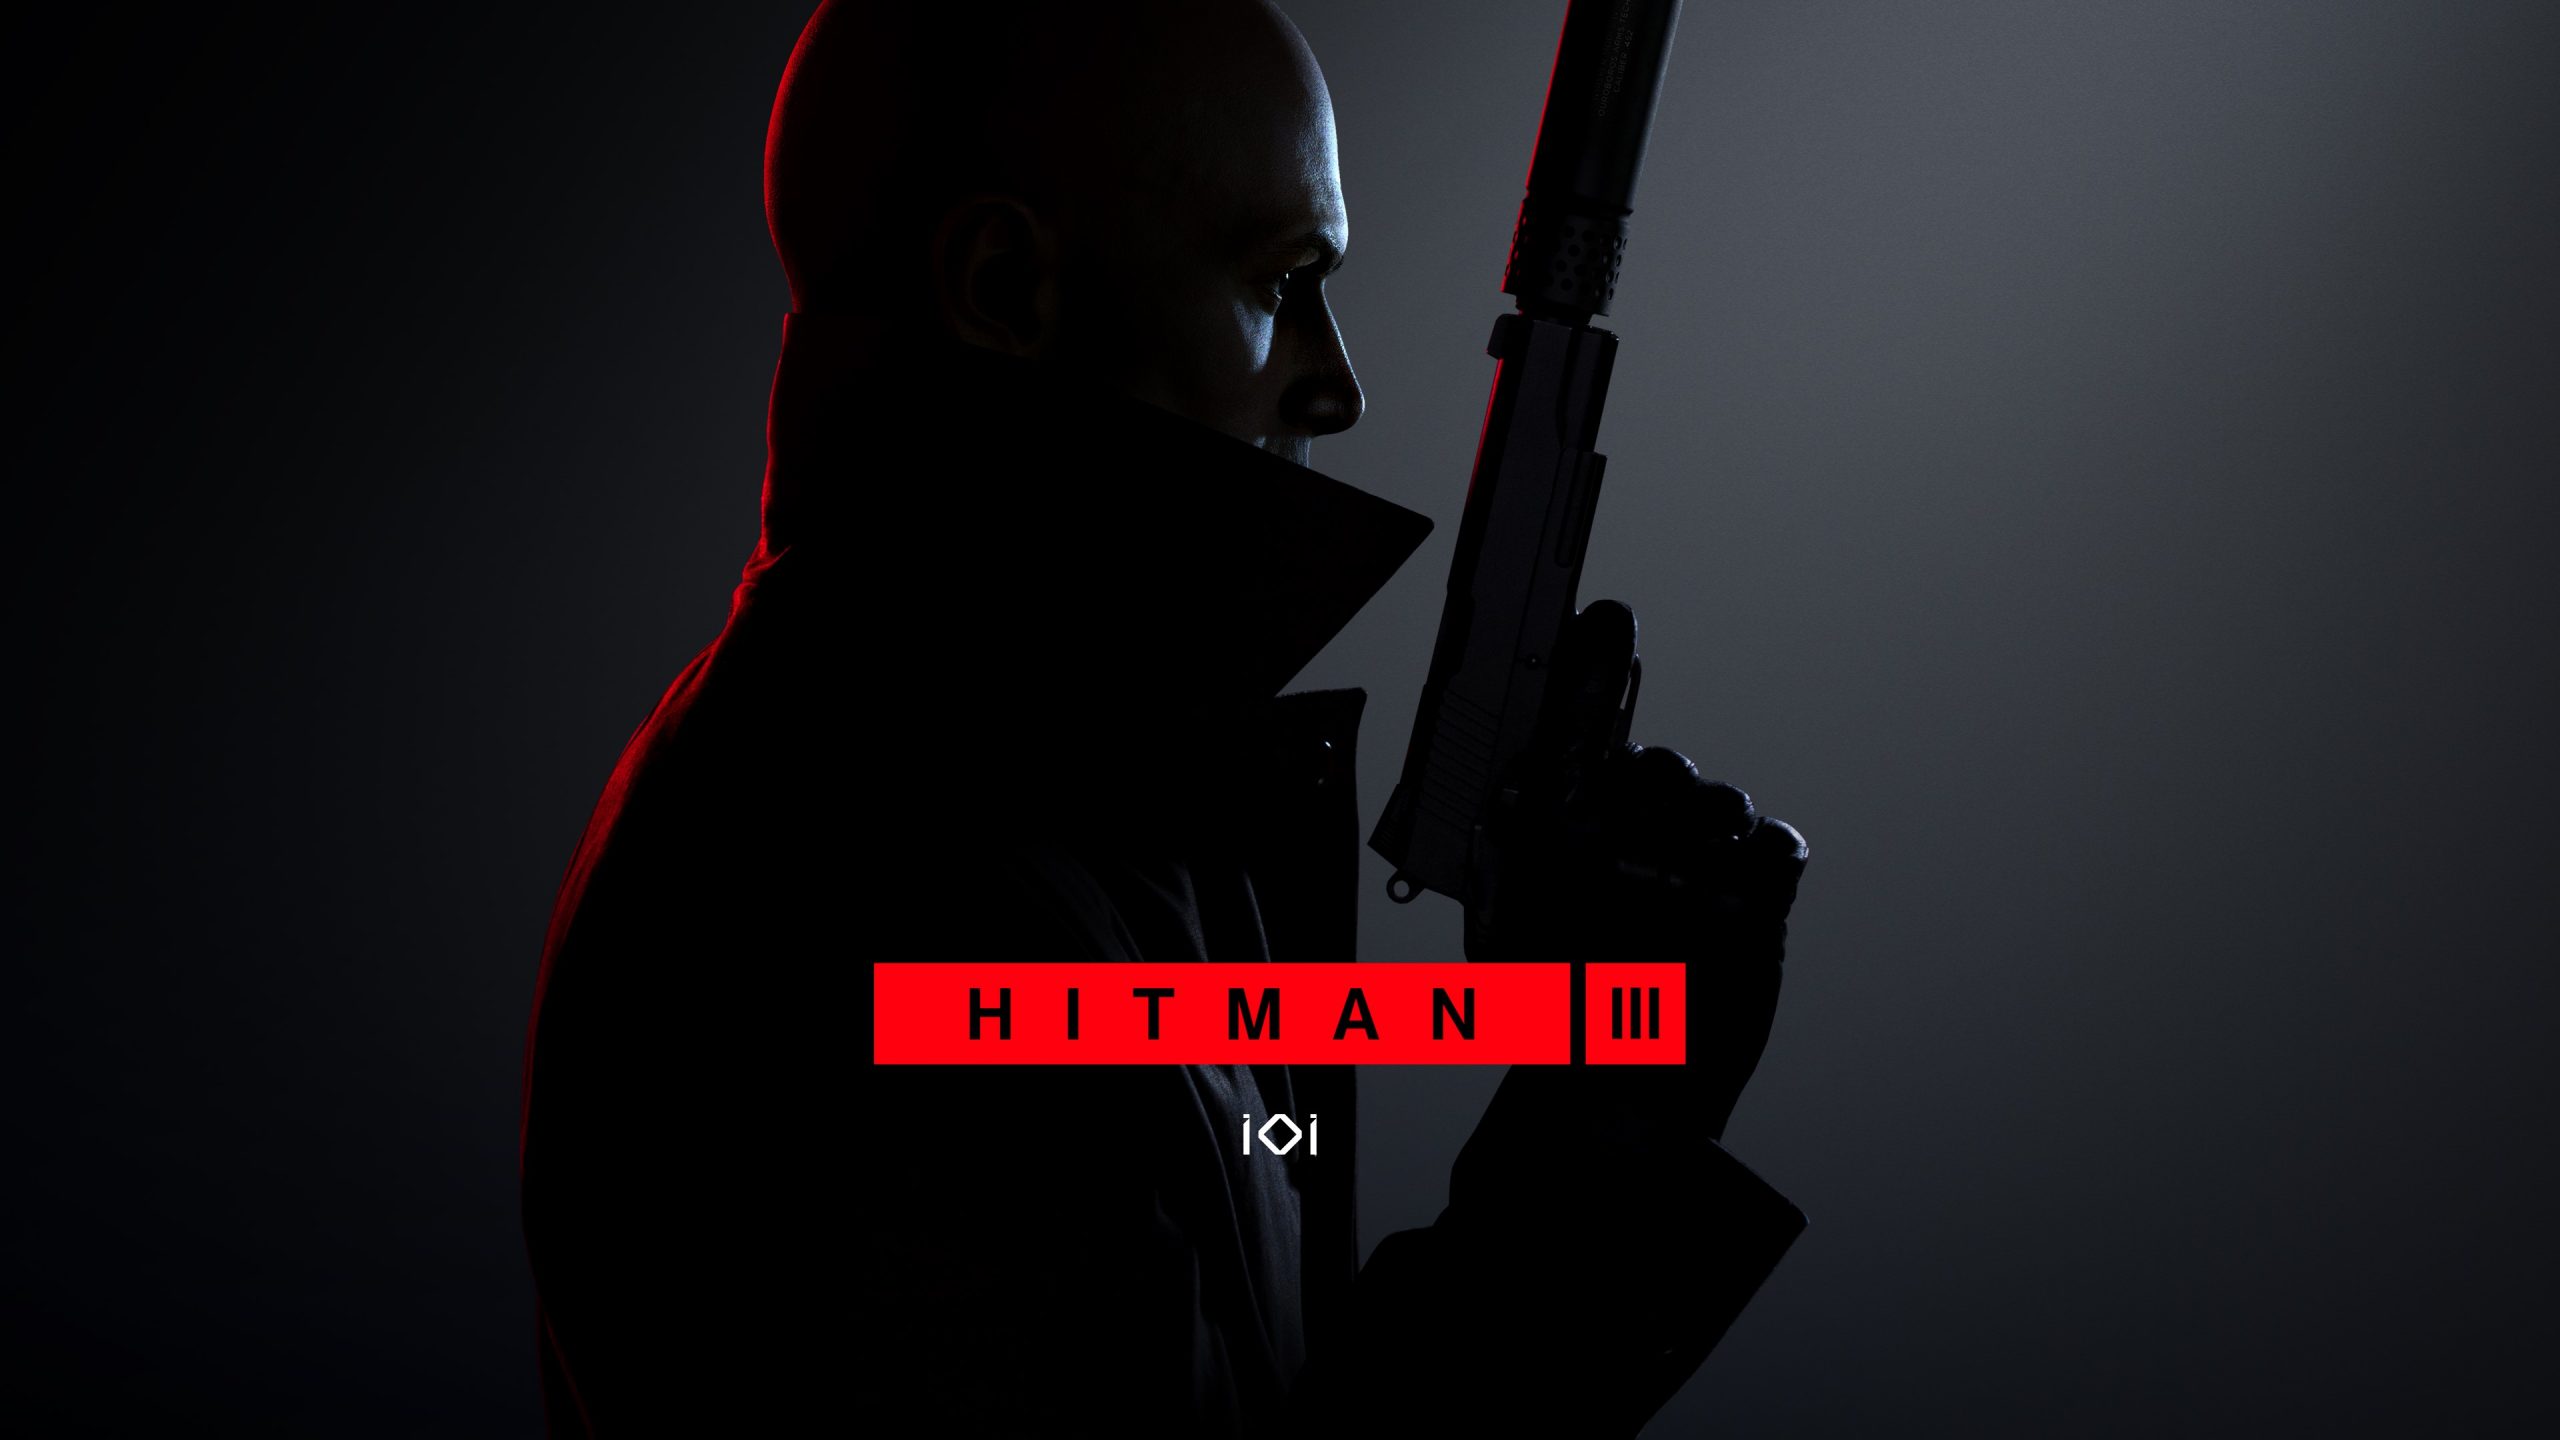 download hitman ps 3 for free